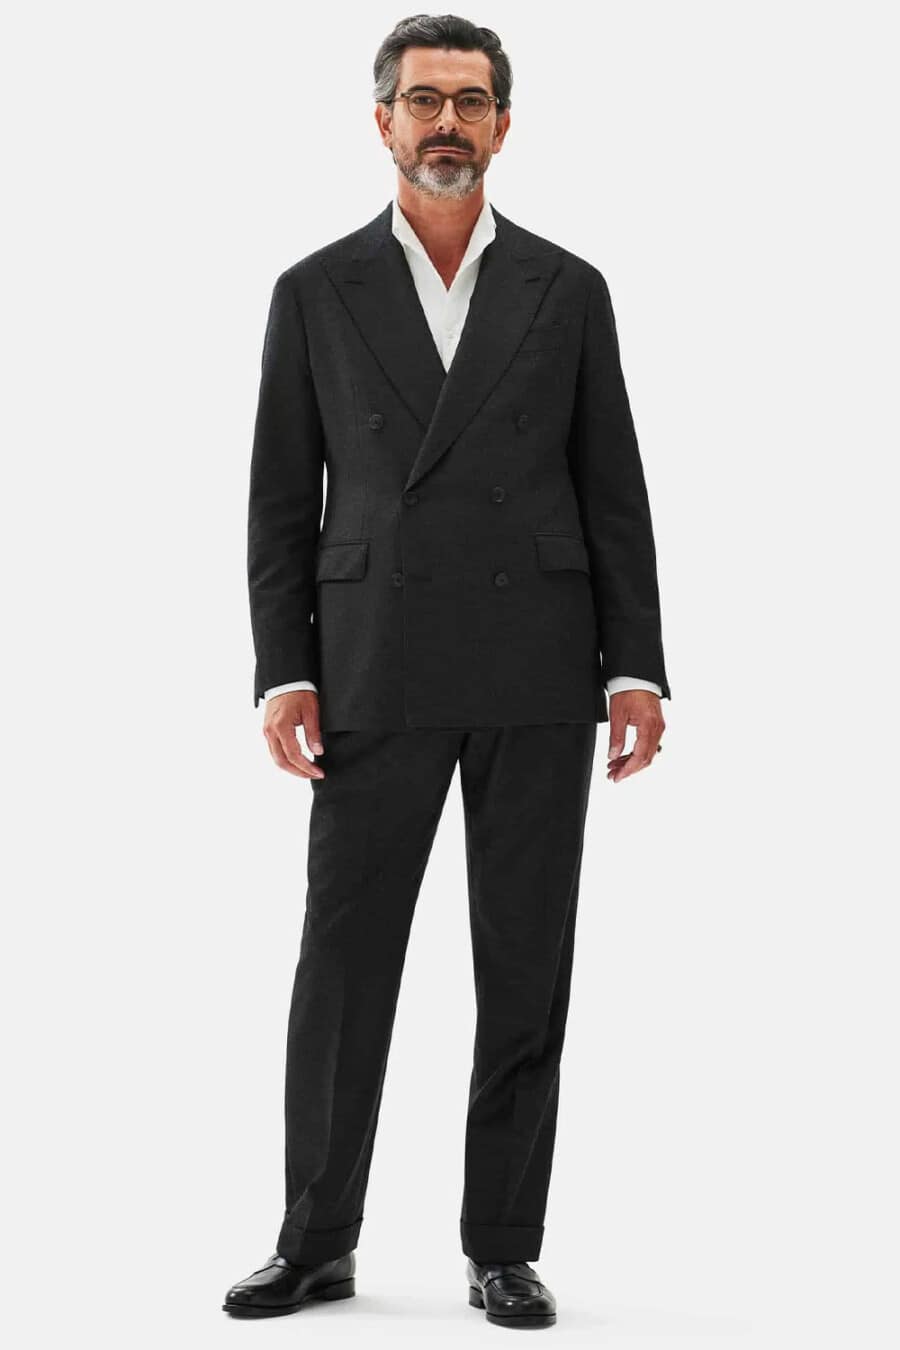 Men's black double-breasted suit, white open shirt and black leather loafers outfit